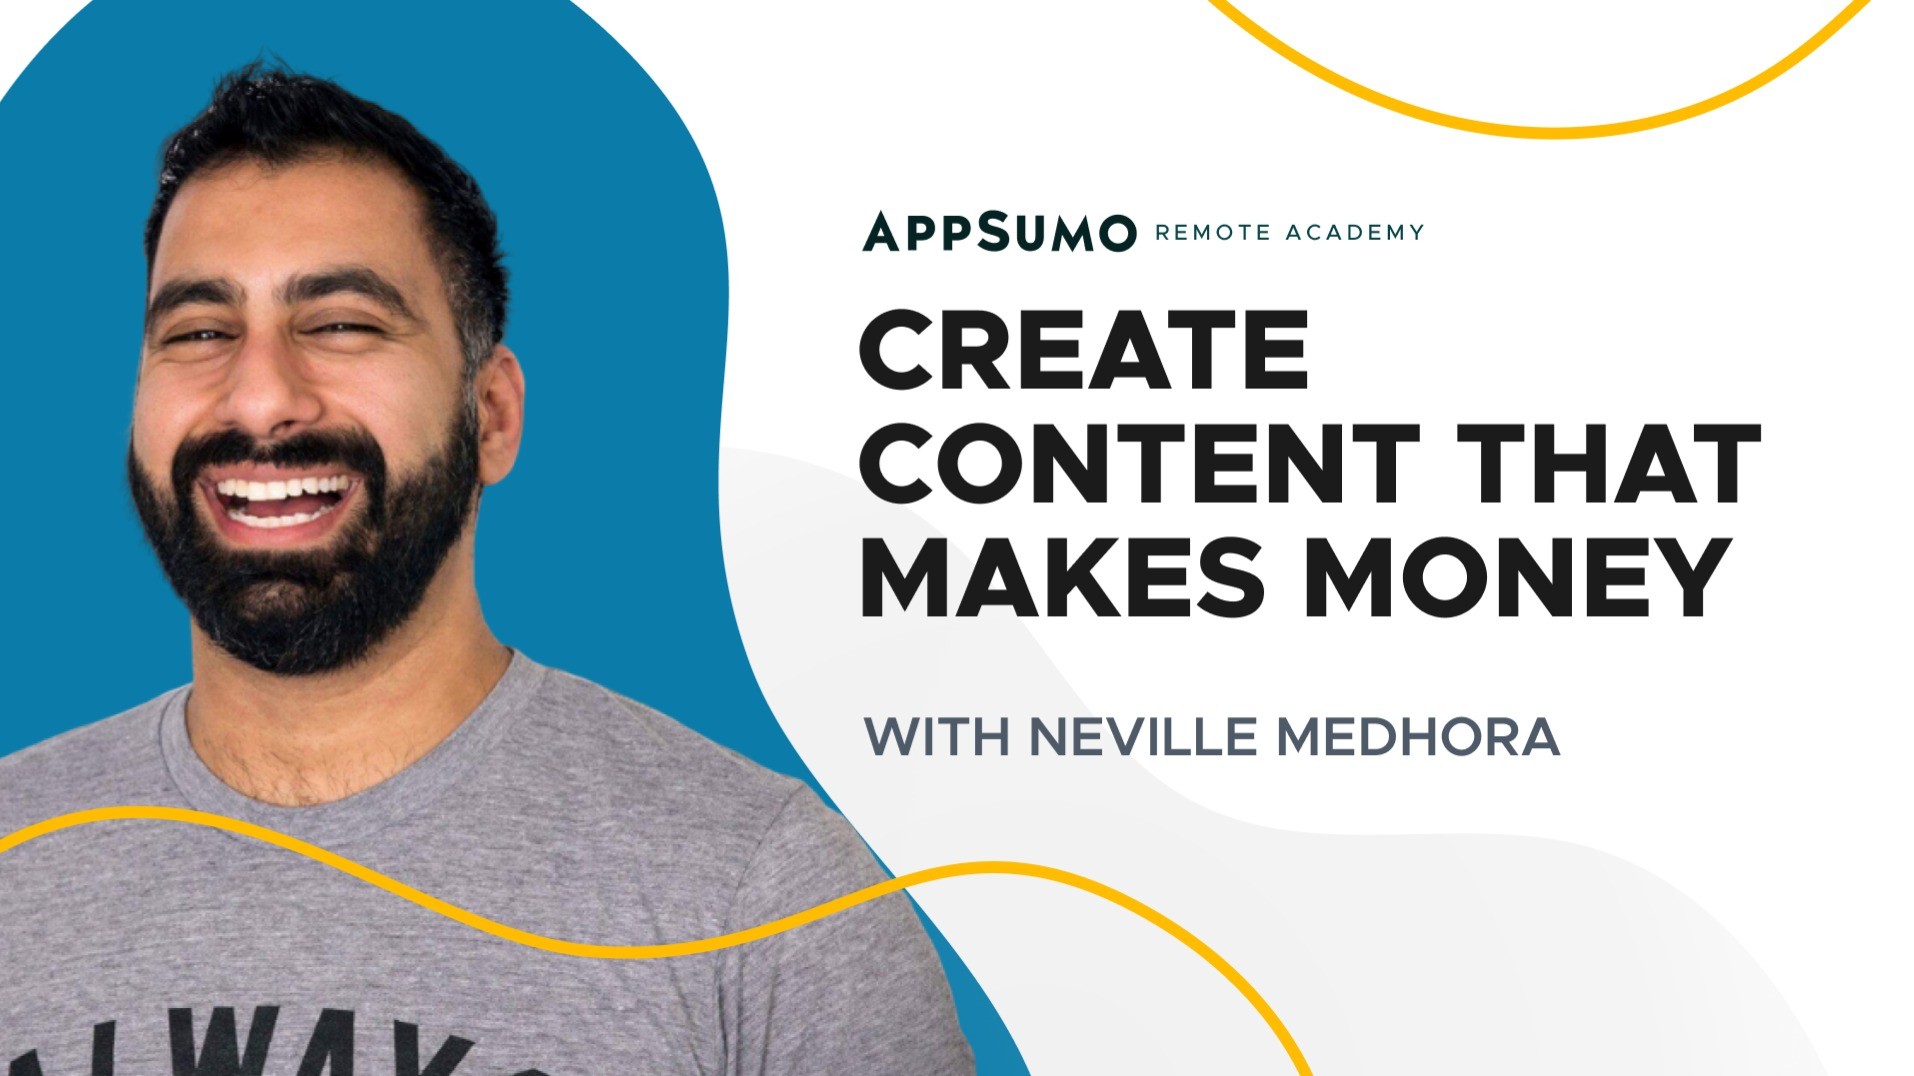 AppSumo Deal for Remote Work Academy: Create Content that Makes Money - Plus Exclusive